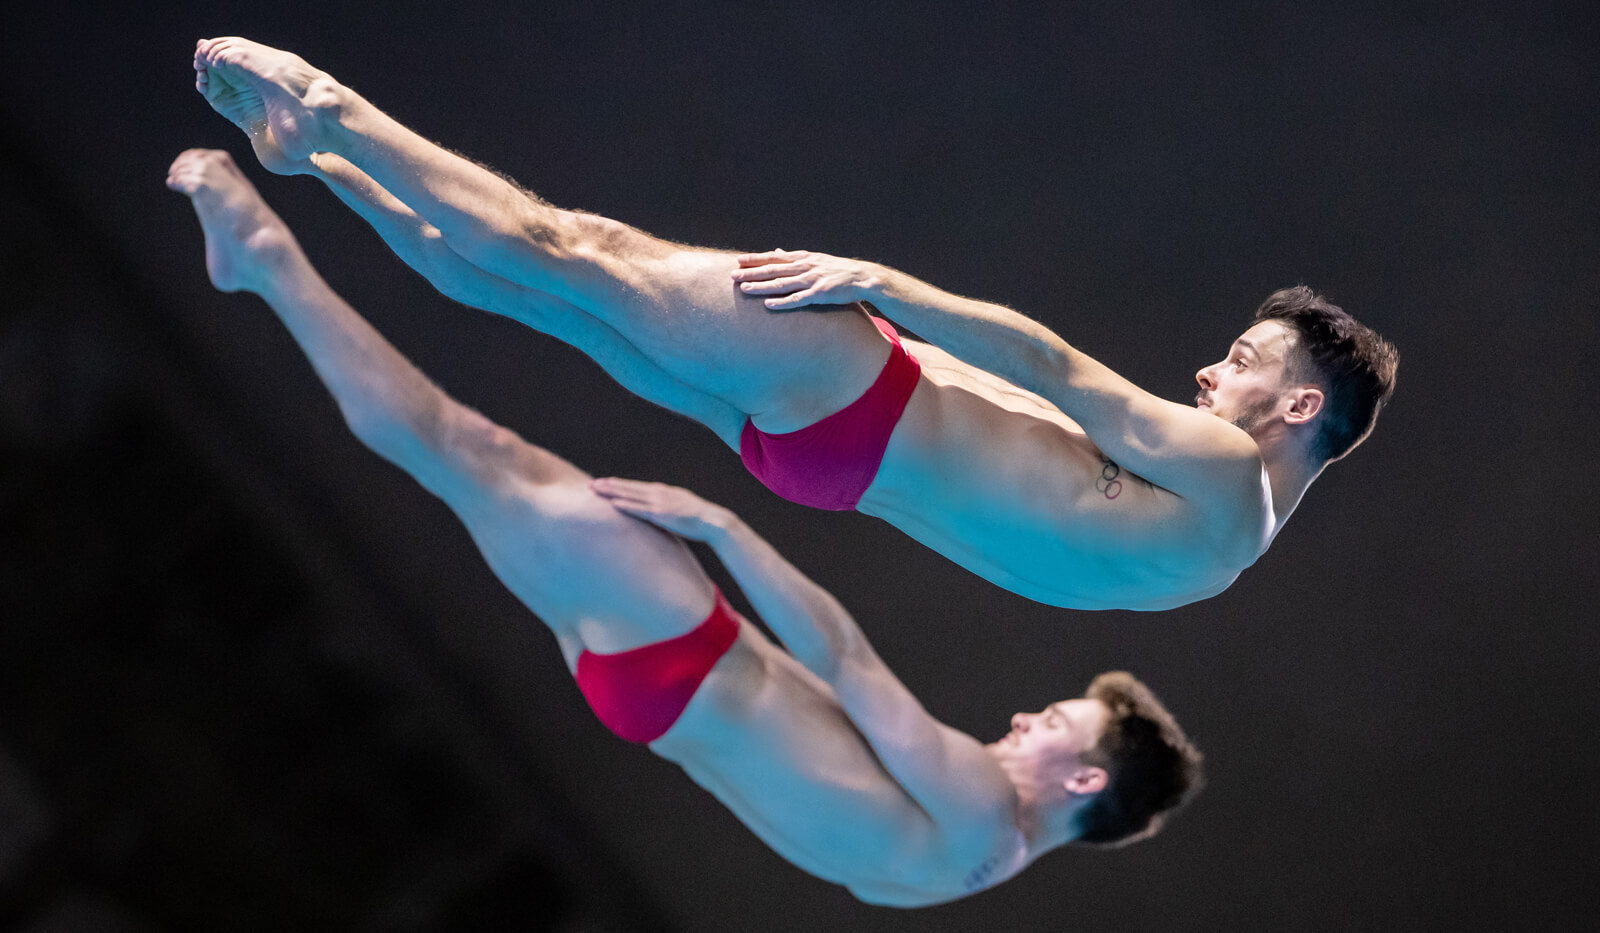 Kazan: Canada comes up short of the podium on Day 1